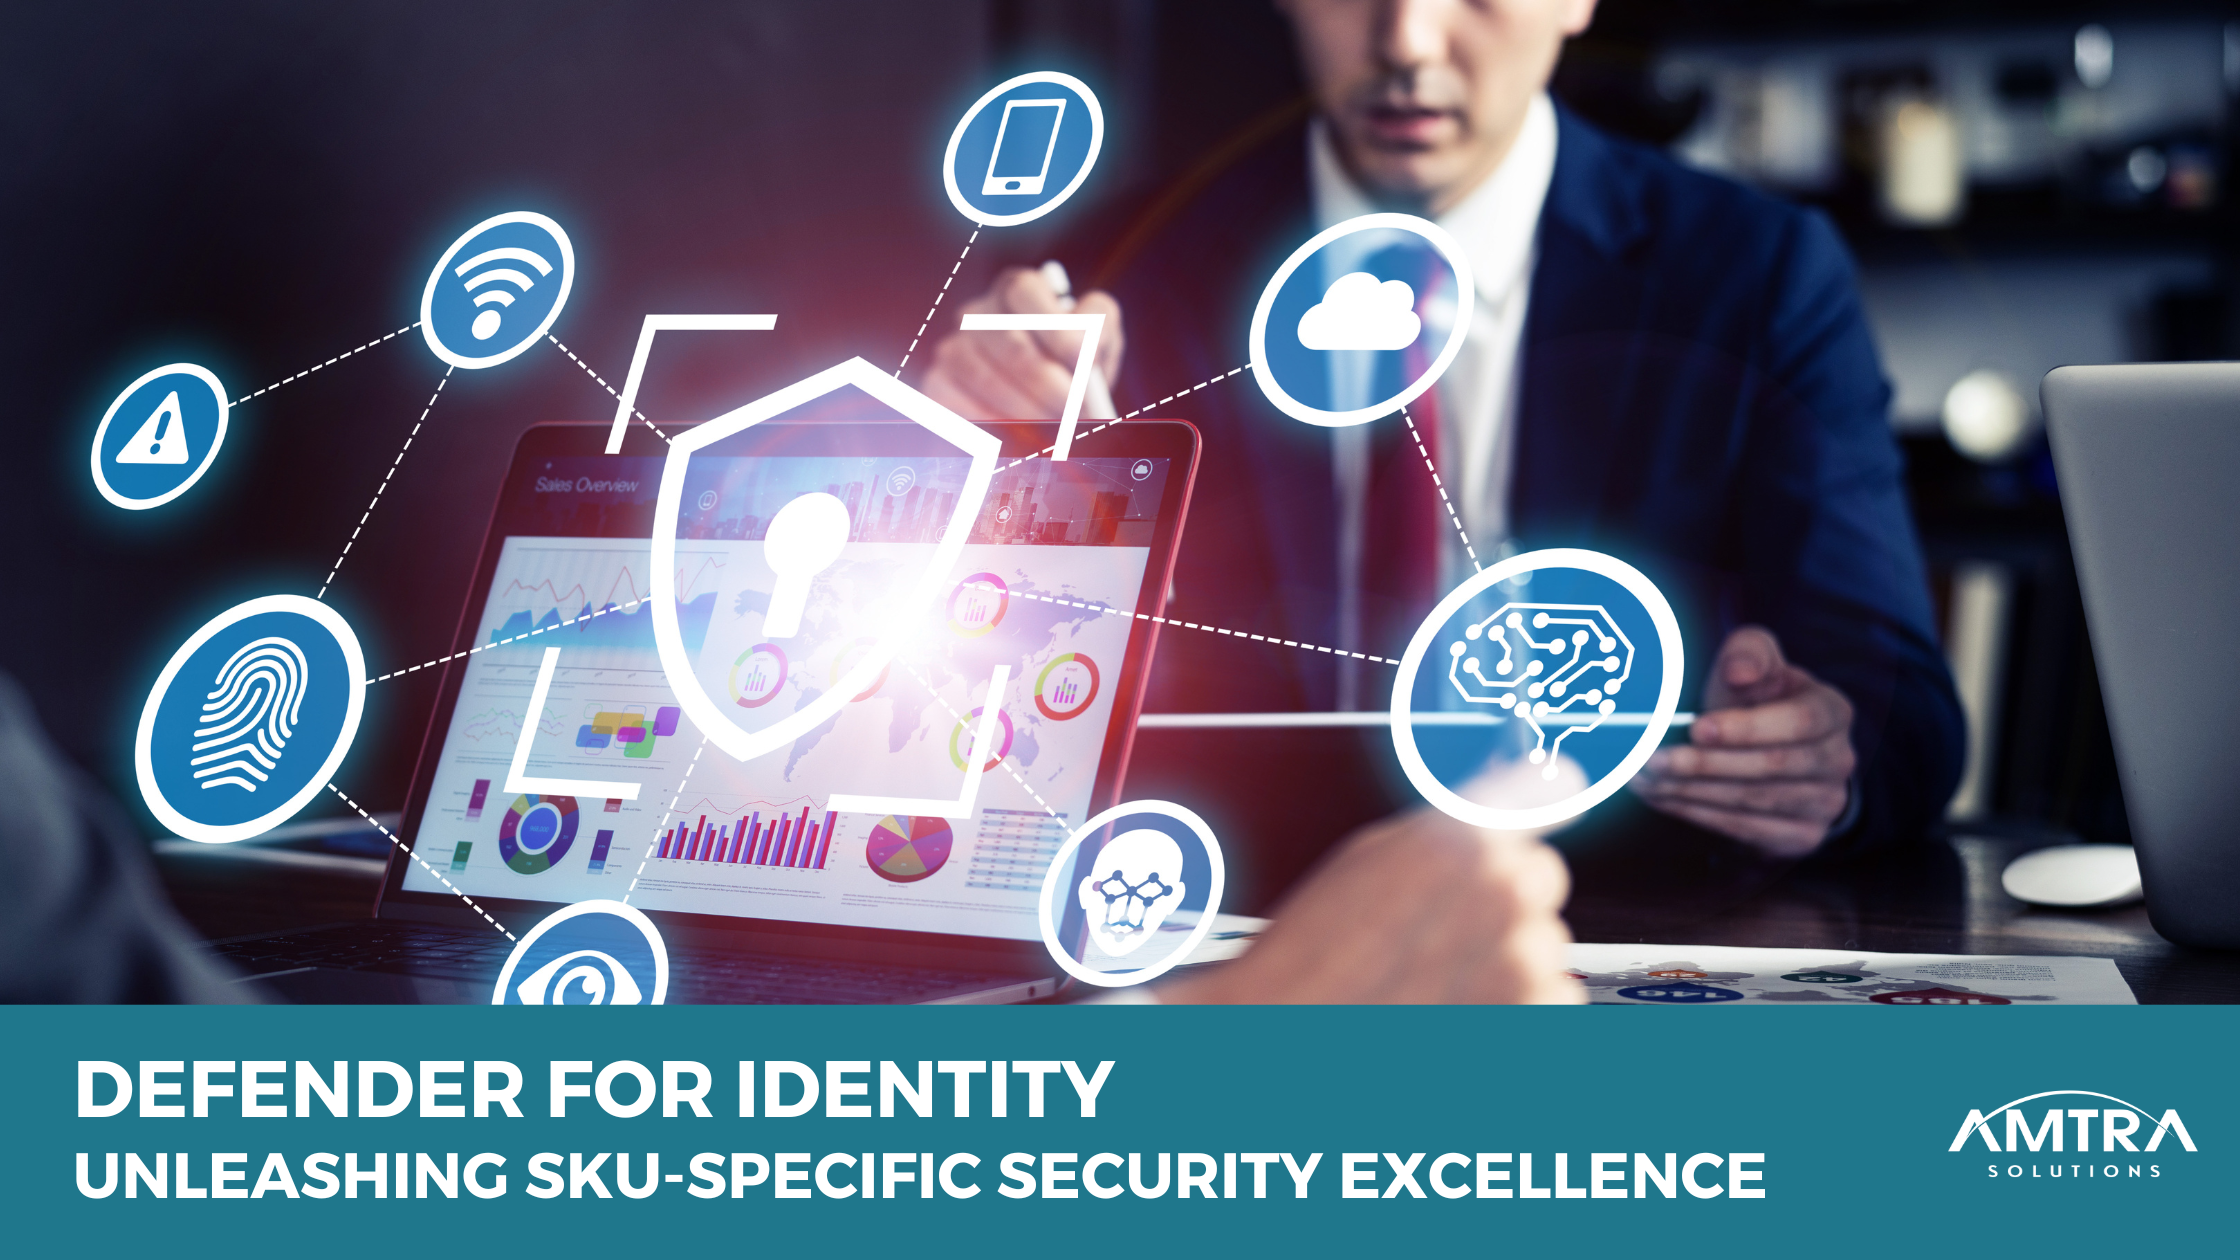 Defender for Identity: Unleashing SKU-Specific Security Excellence